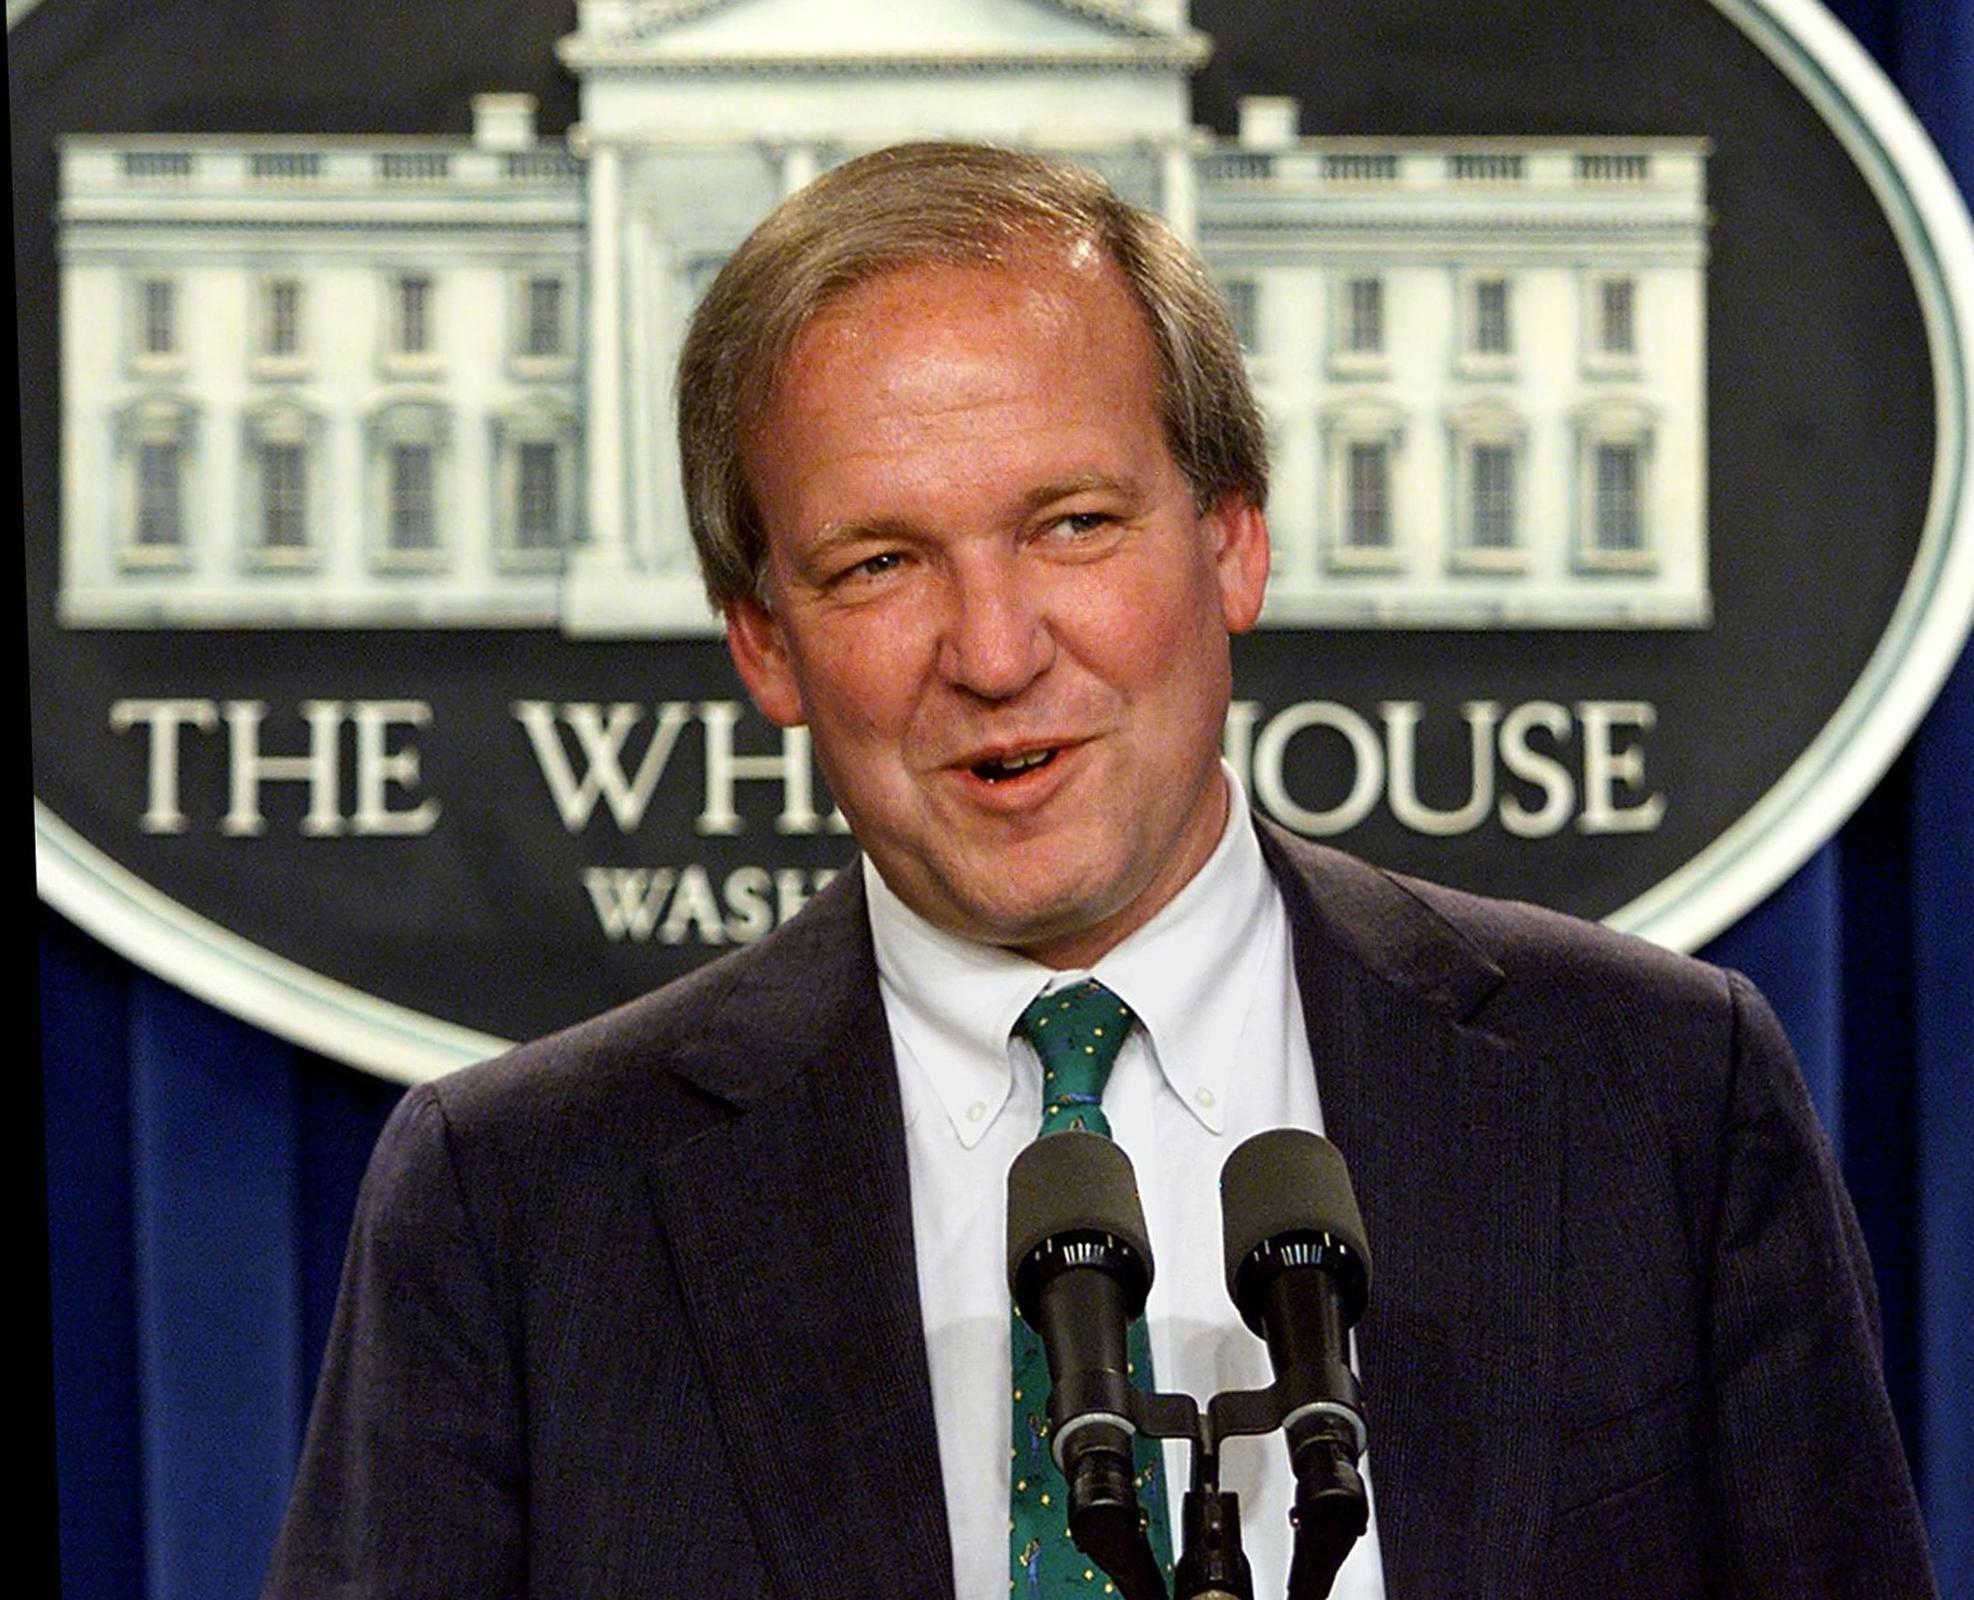 Mike McCurry worked as Bill Clinton’s press secretary from 1994 to 1998